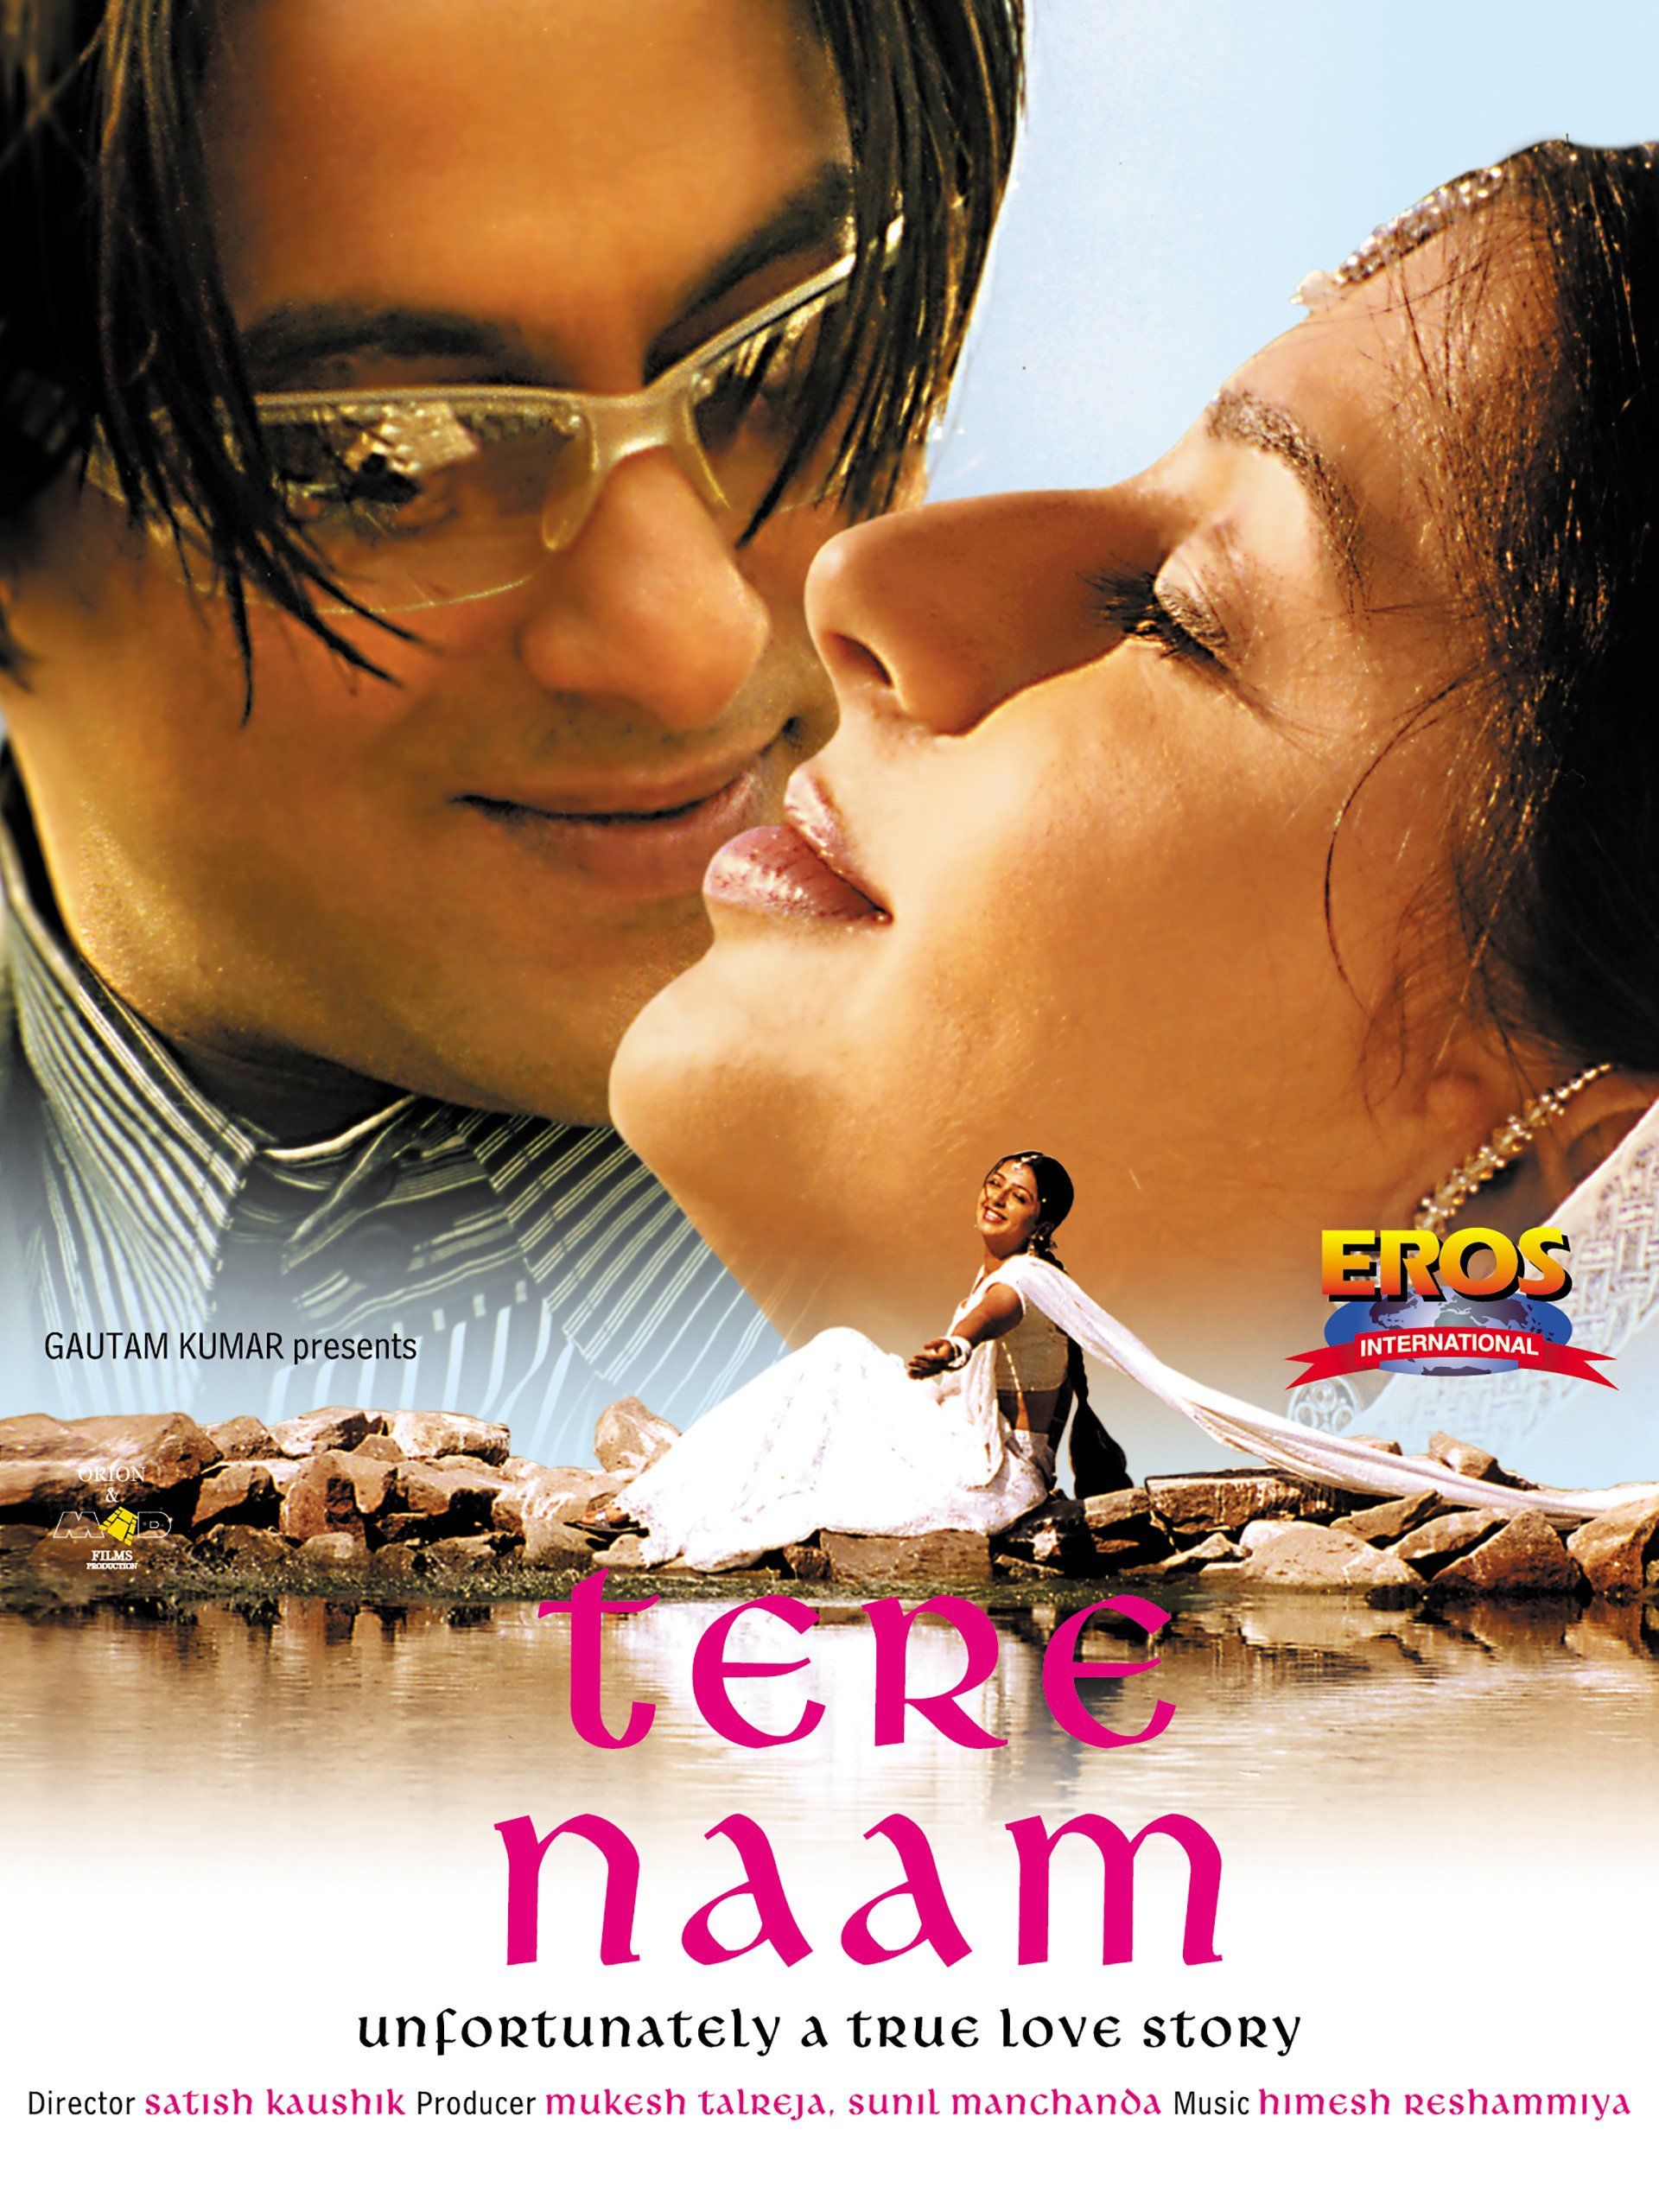 jaan tere naam movie all video song download hd